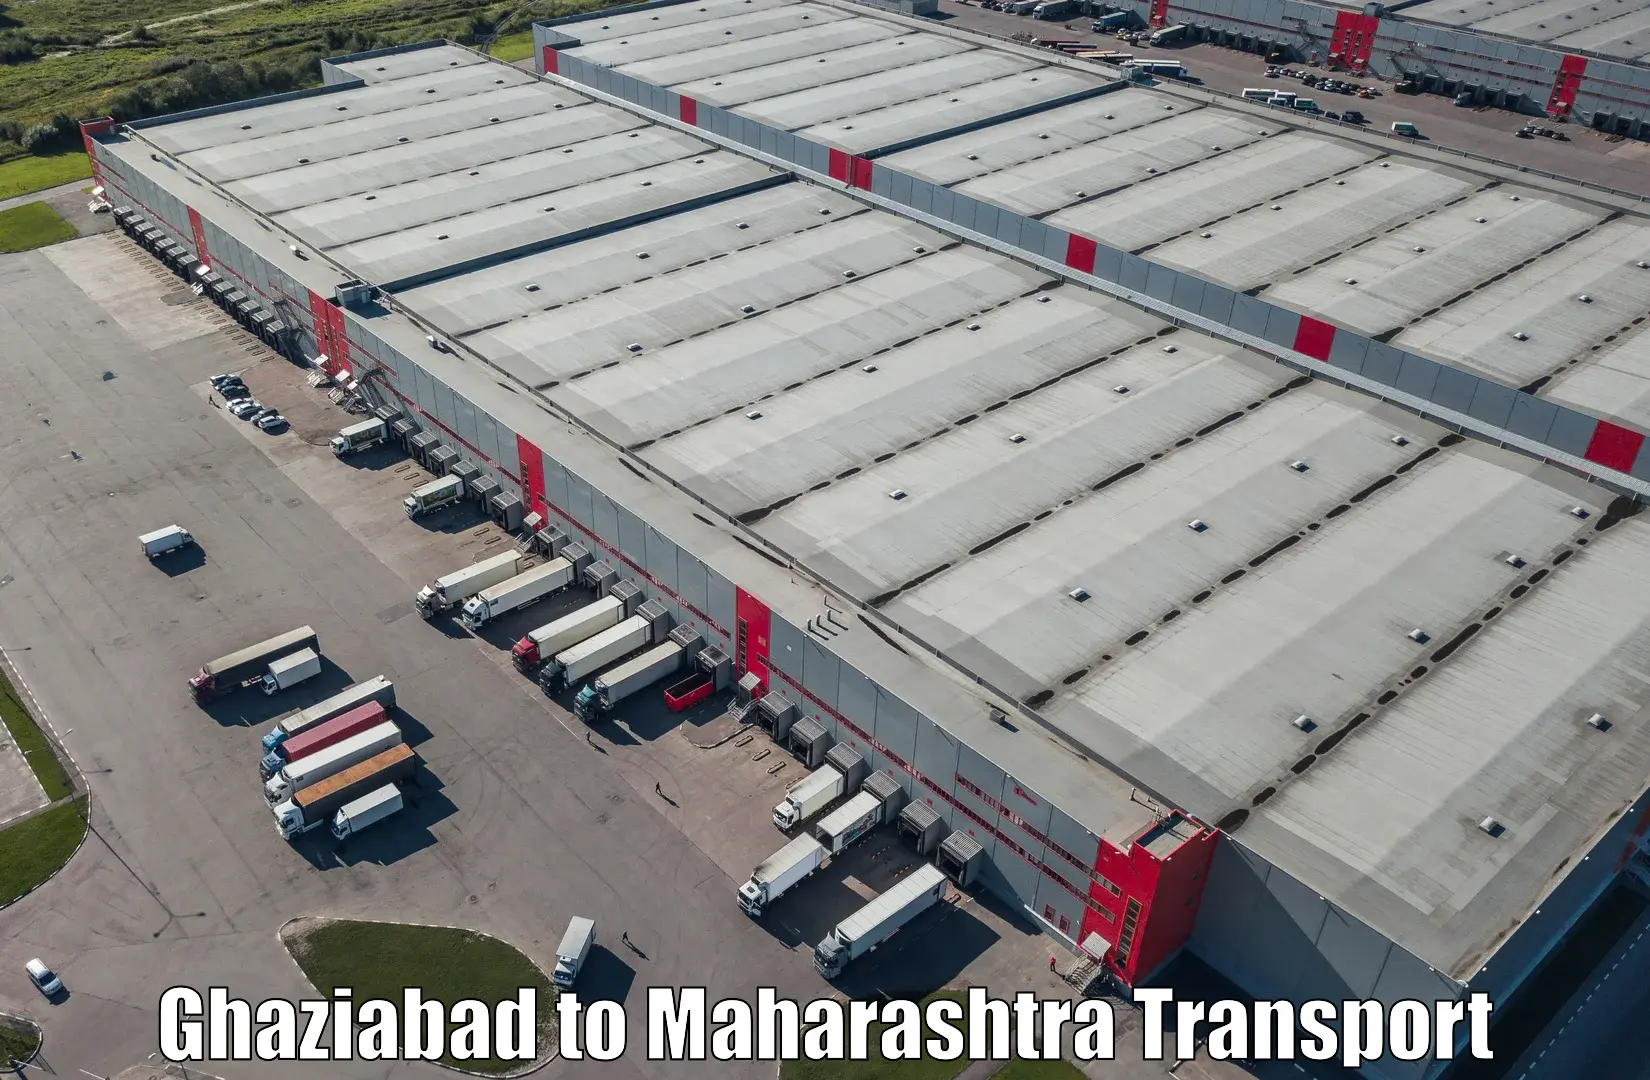 Daily parcel service transport Ghaziabad to Kale Kolhapur